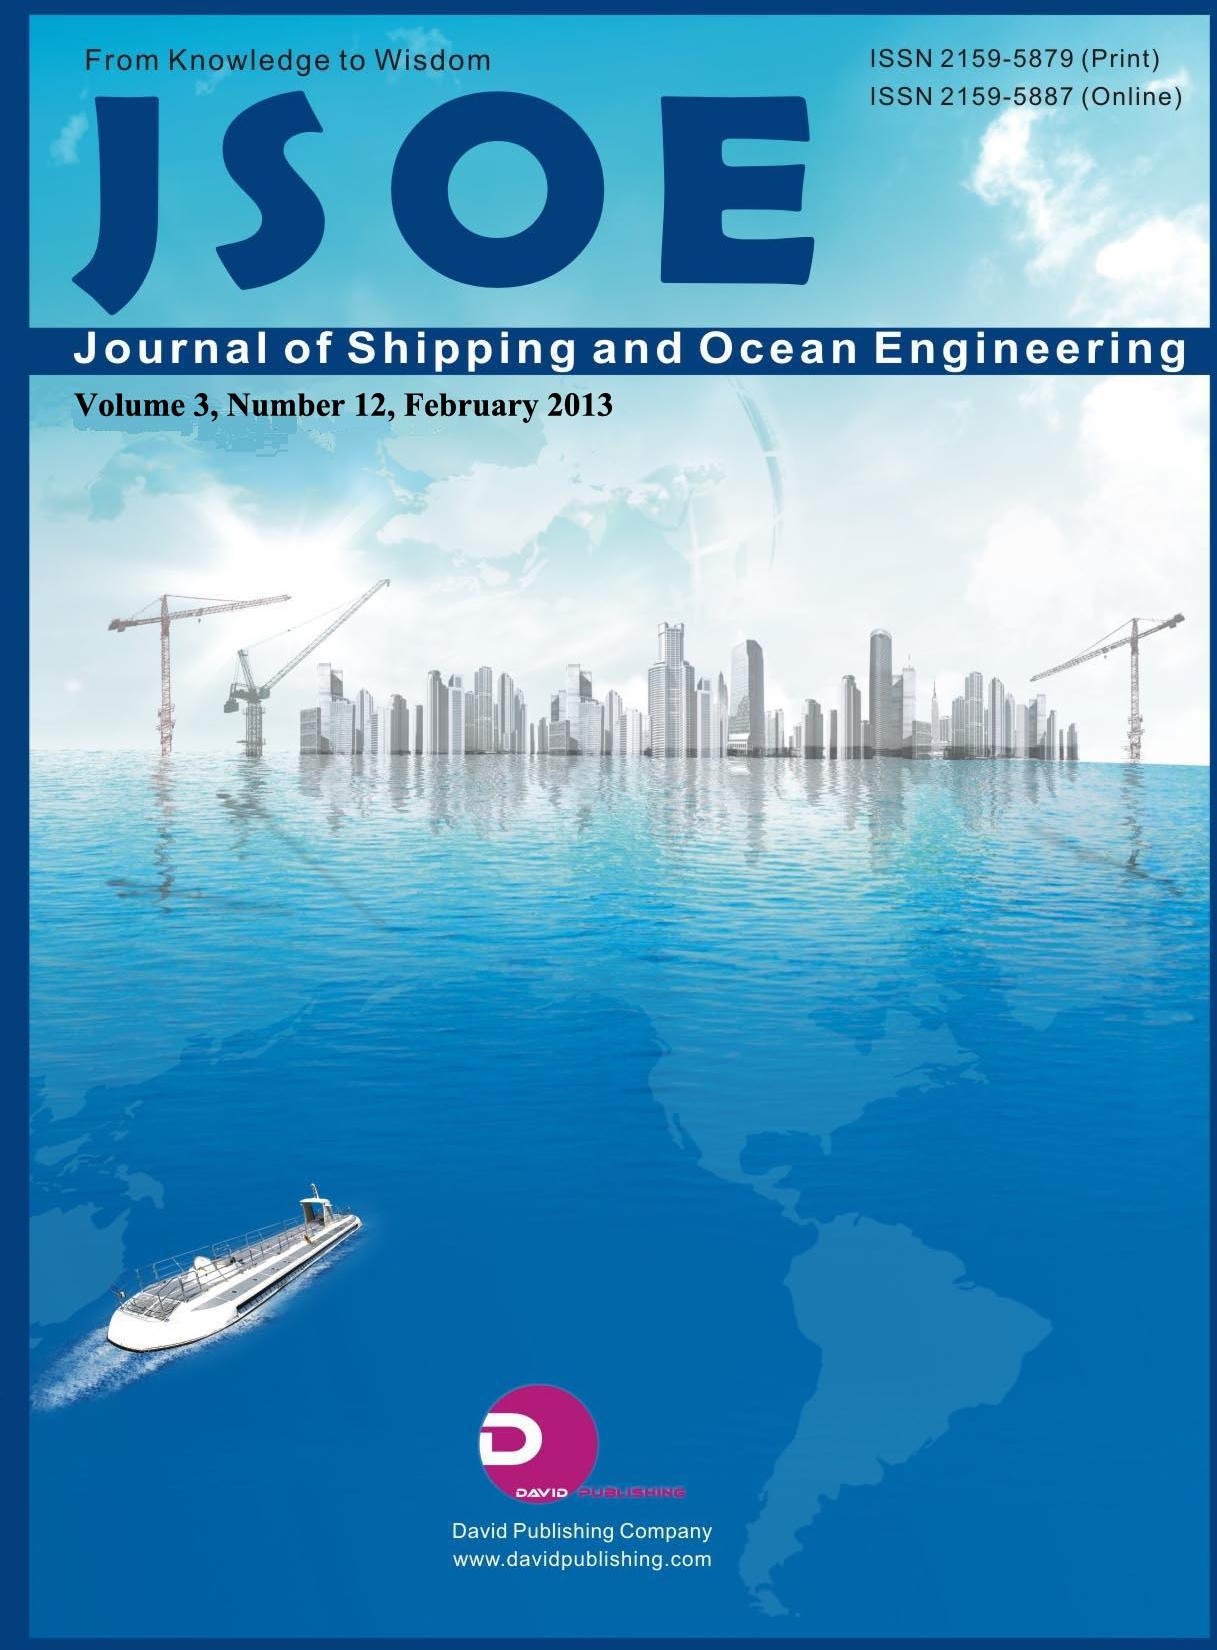 Journal of Shipping and Ocean Engineering